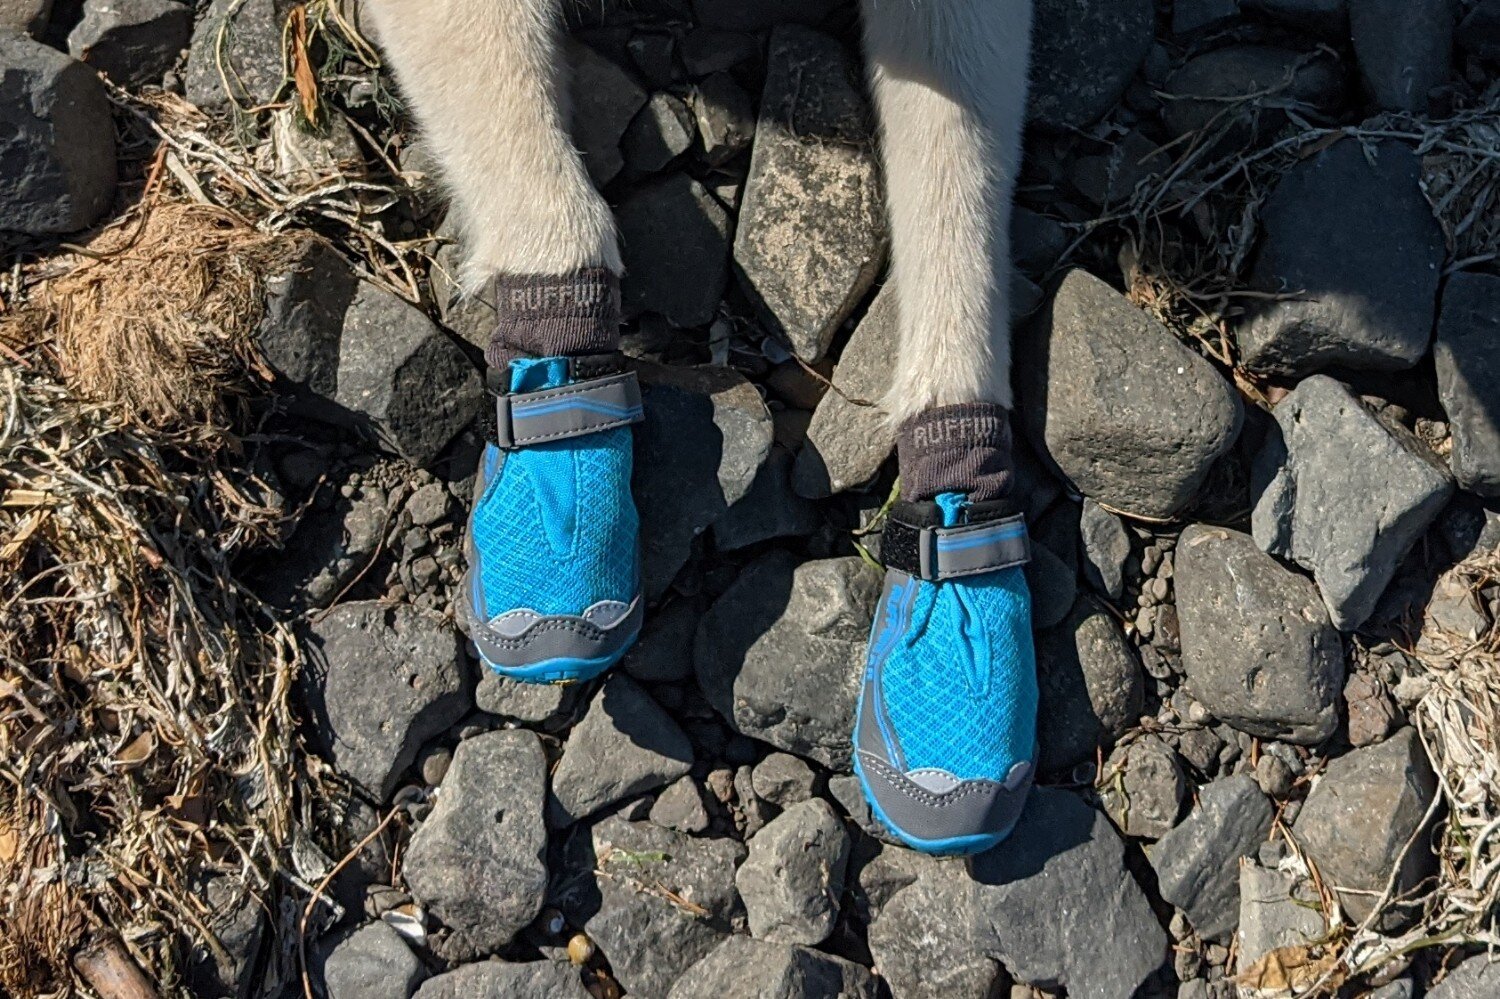 boot liners are a great solution if you find that your dog’s boots are causing them blisters